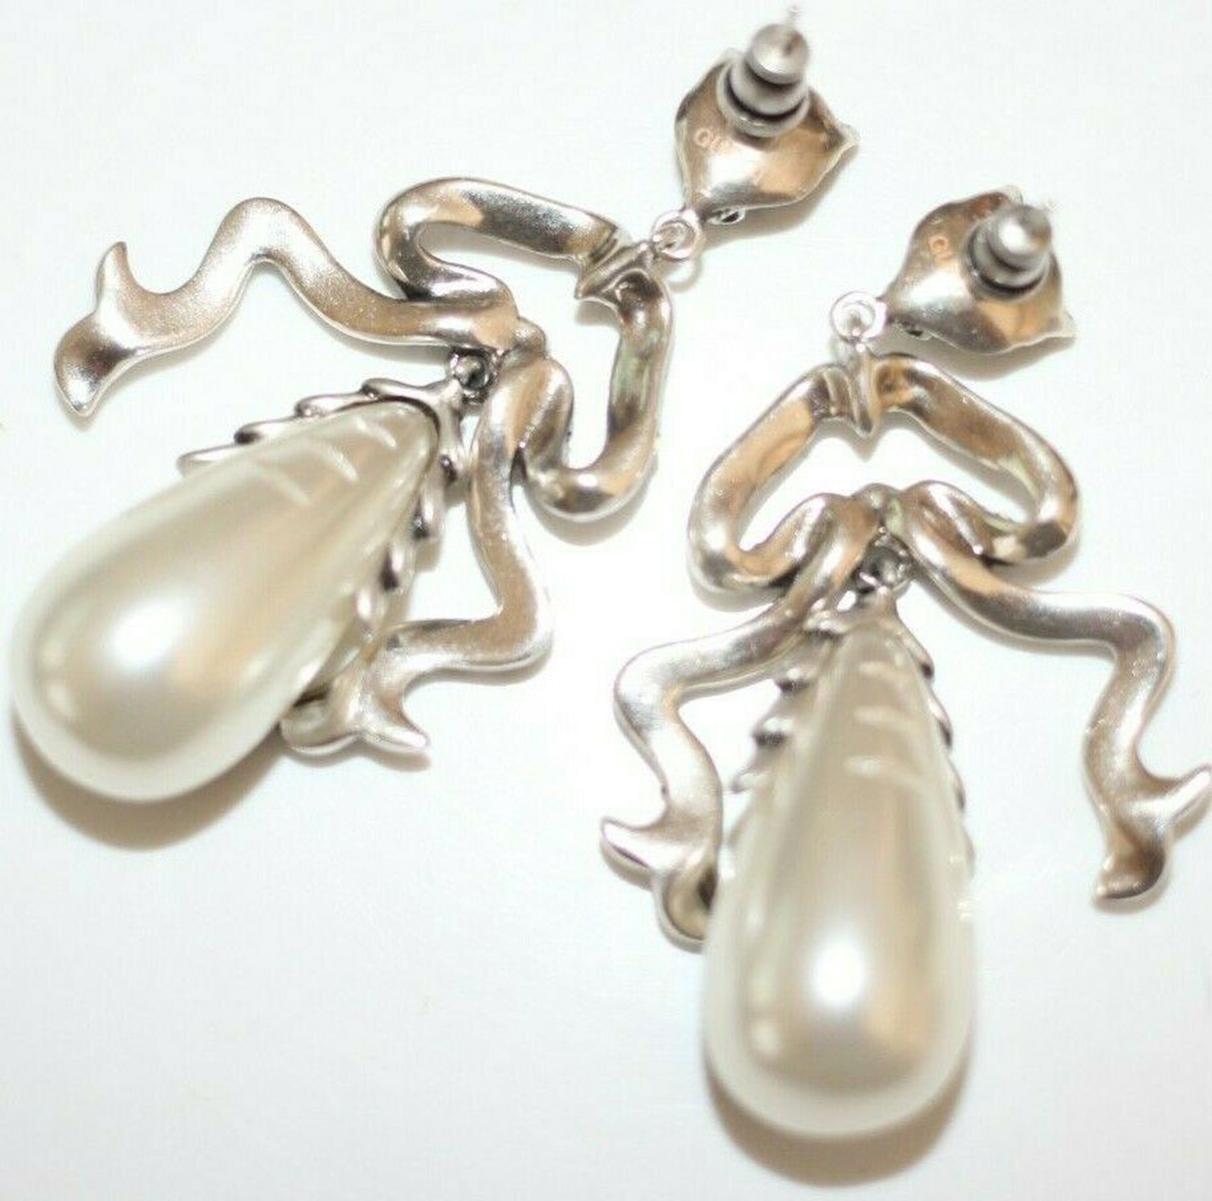 Fabulous Gucci Faux Pearl Teardrop Dangle Earrings, Silver plated mountings; each earring has a Panther head, suspending a bow, enhanced with sparkling Faux Diamonds and a Teardrop Faux Pearl adorned with a cat’s head. Wow! Signed on reverse: GUCCI;